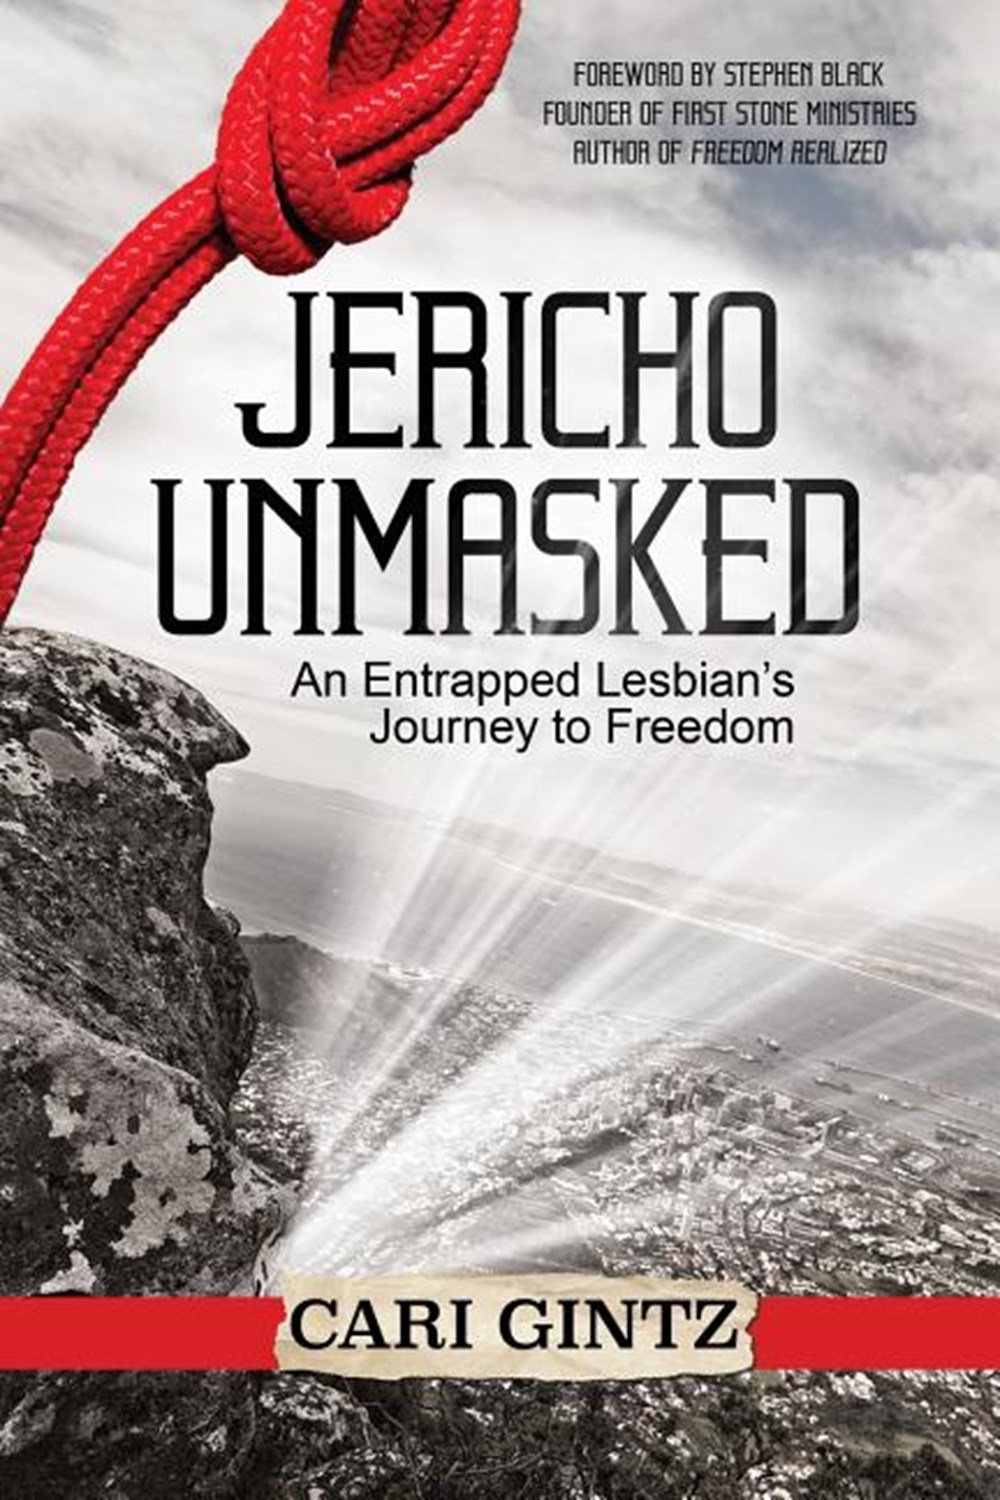 Jericho Unmasked: An Entrapped Lesbian's Journey to Freedom